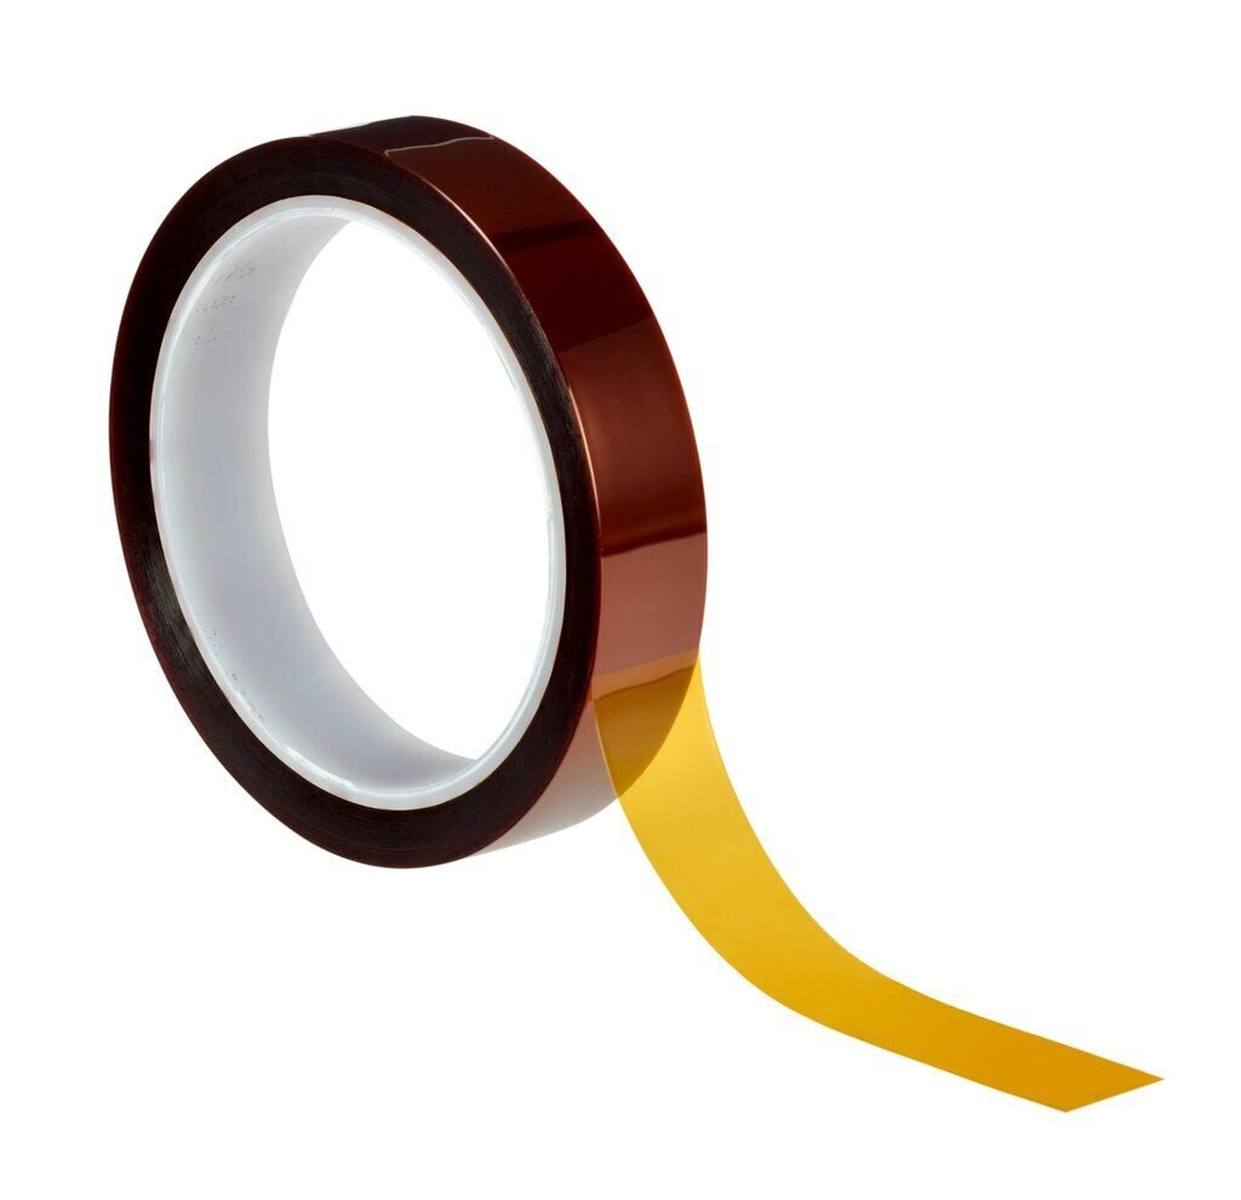 3M high temperature polyimide adhesive tape 5413, brown, 12.7 mm x 33 m, 68.58 µm